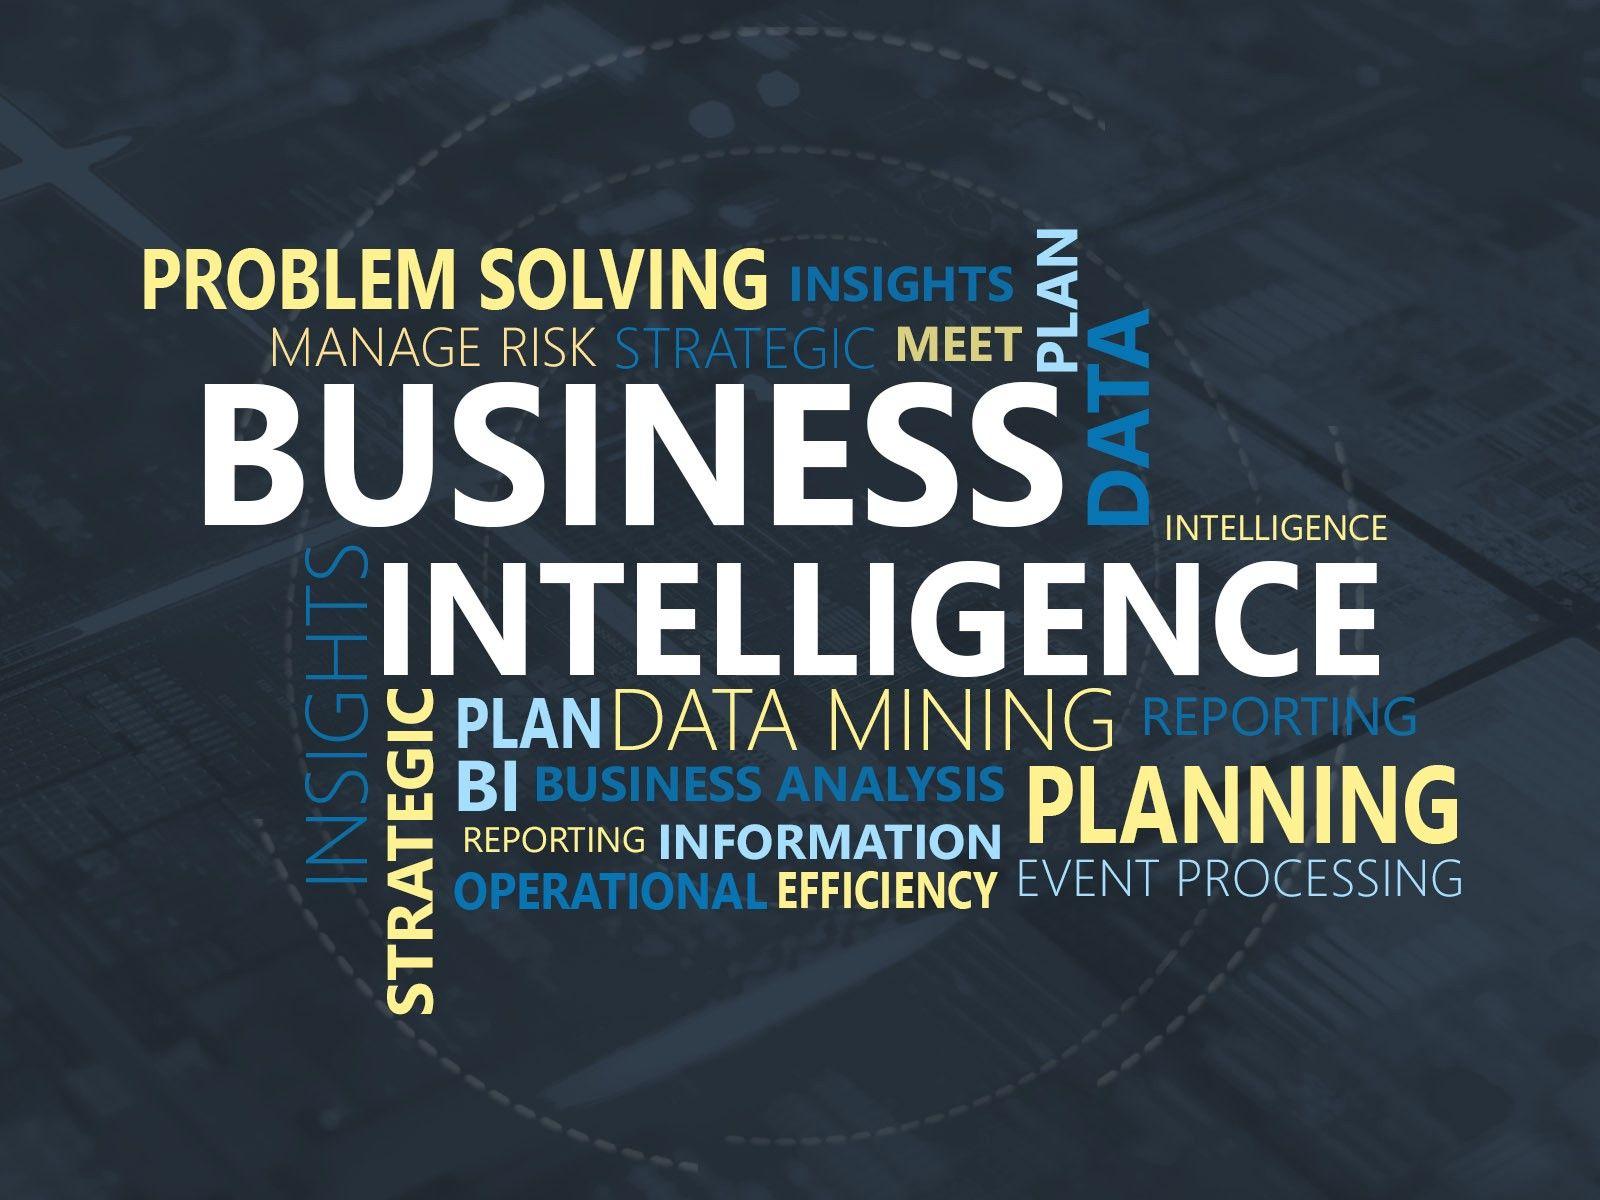 research paper business intelligence